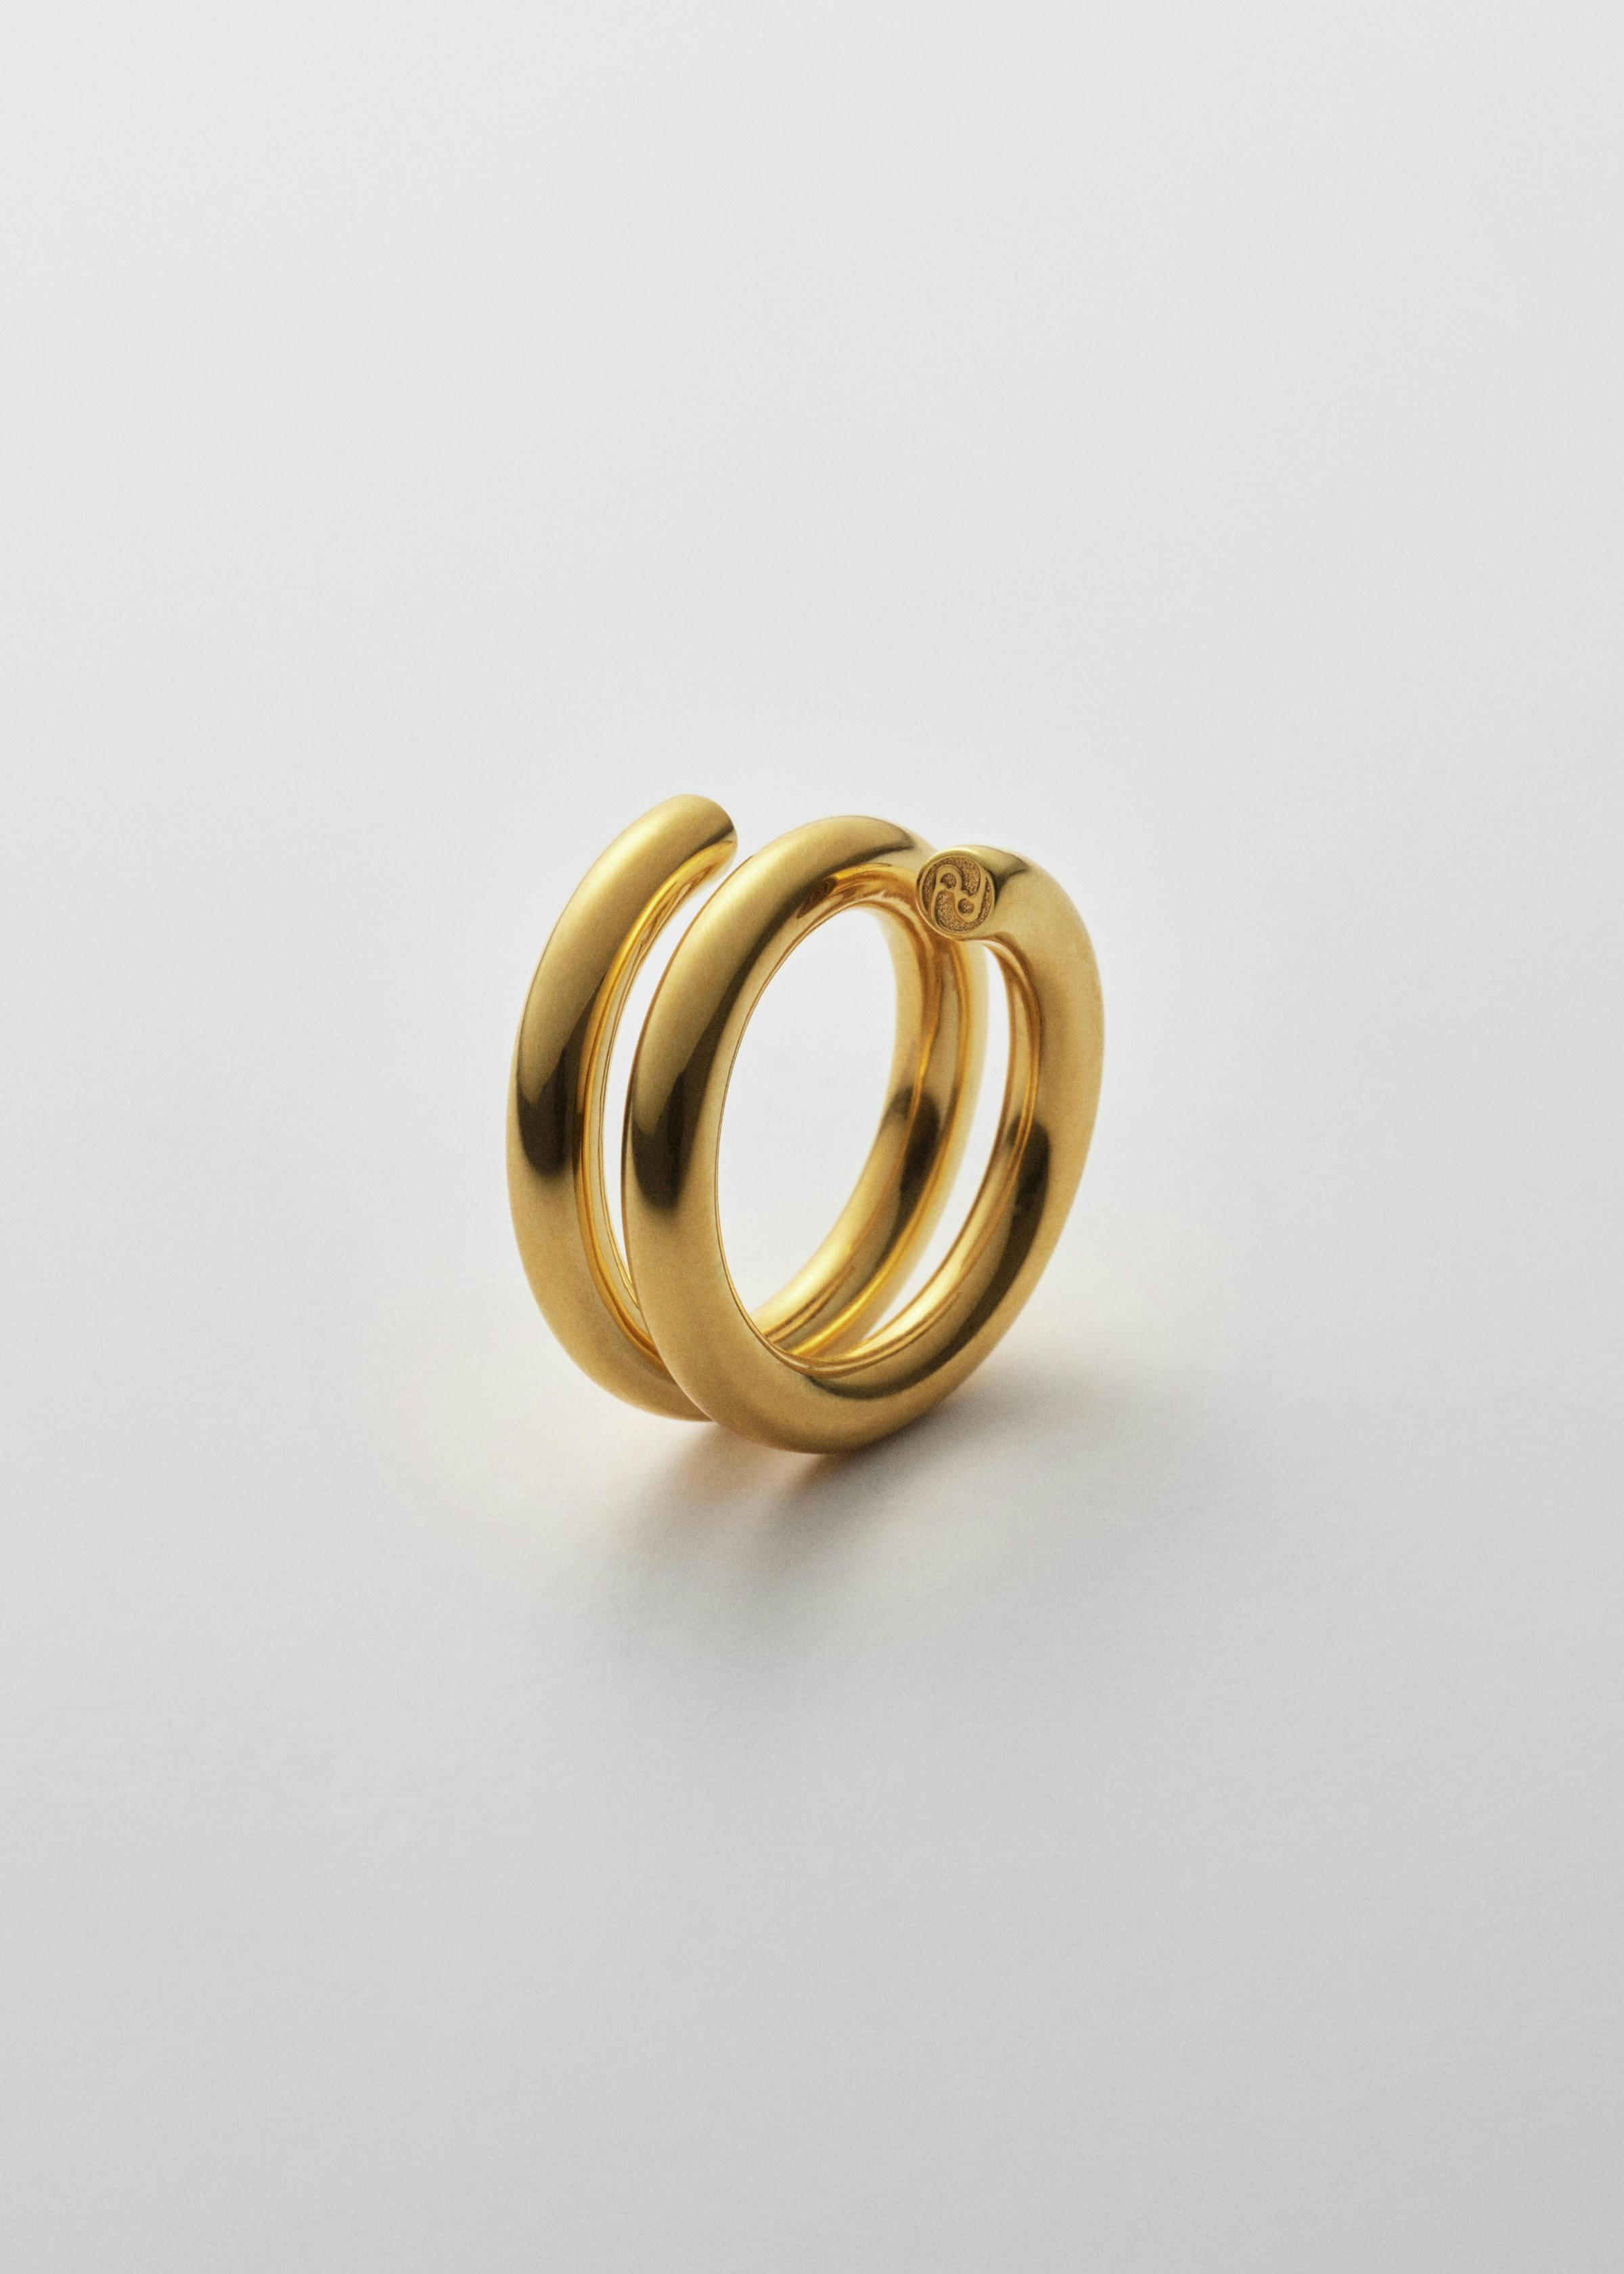 Coil ring